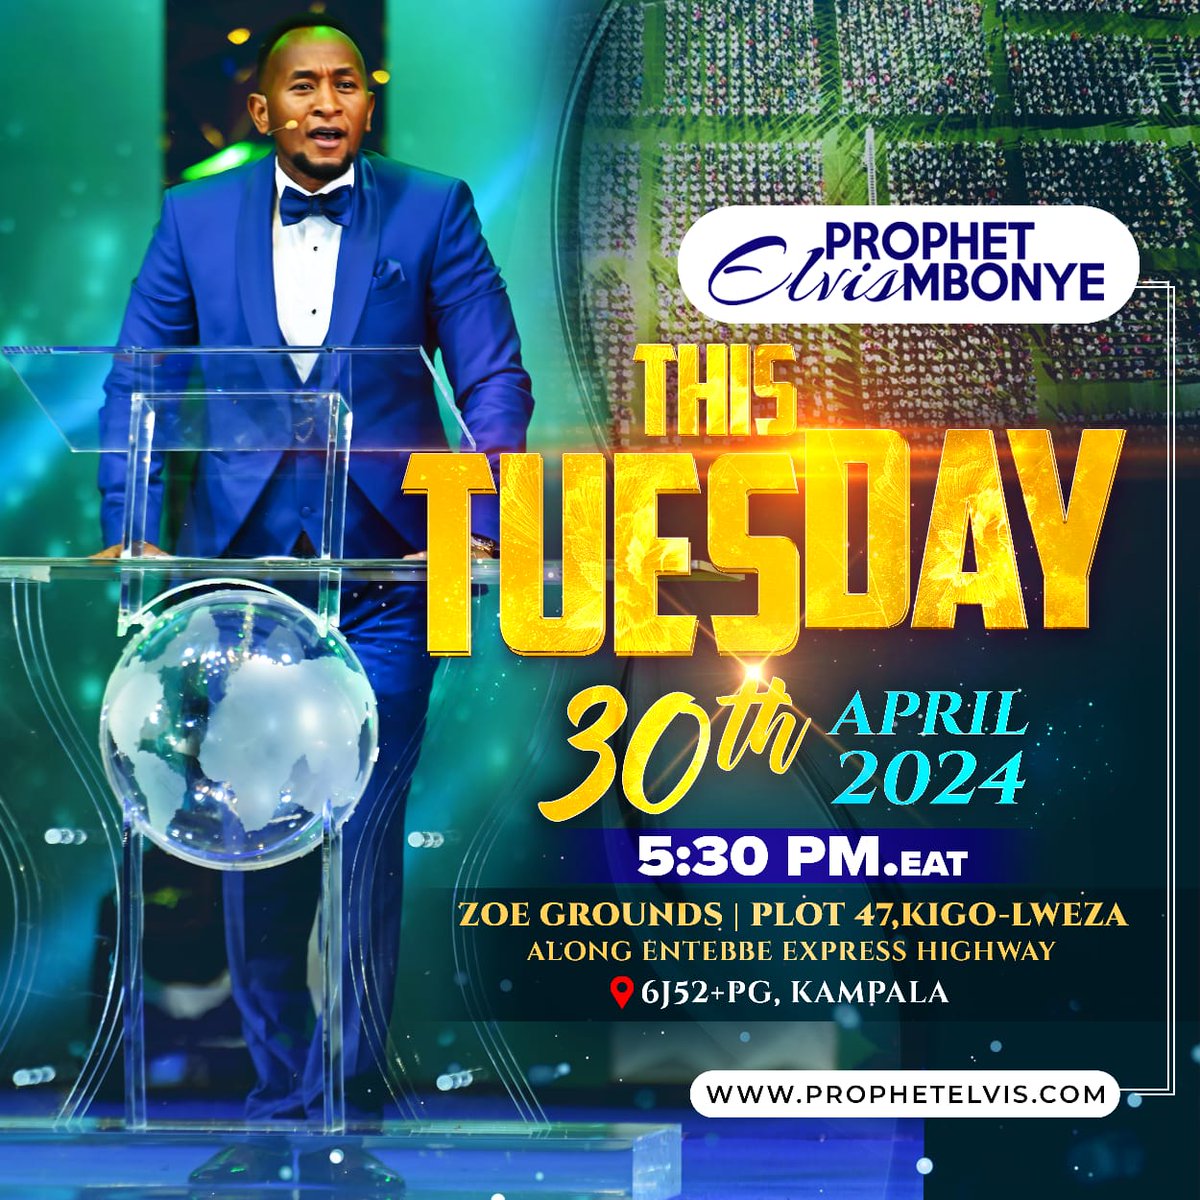 Tomorrow is such a special day. #ProphetElvisMbonye